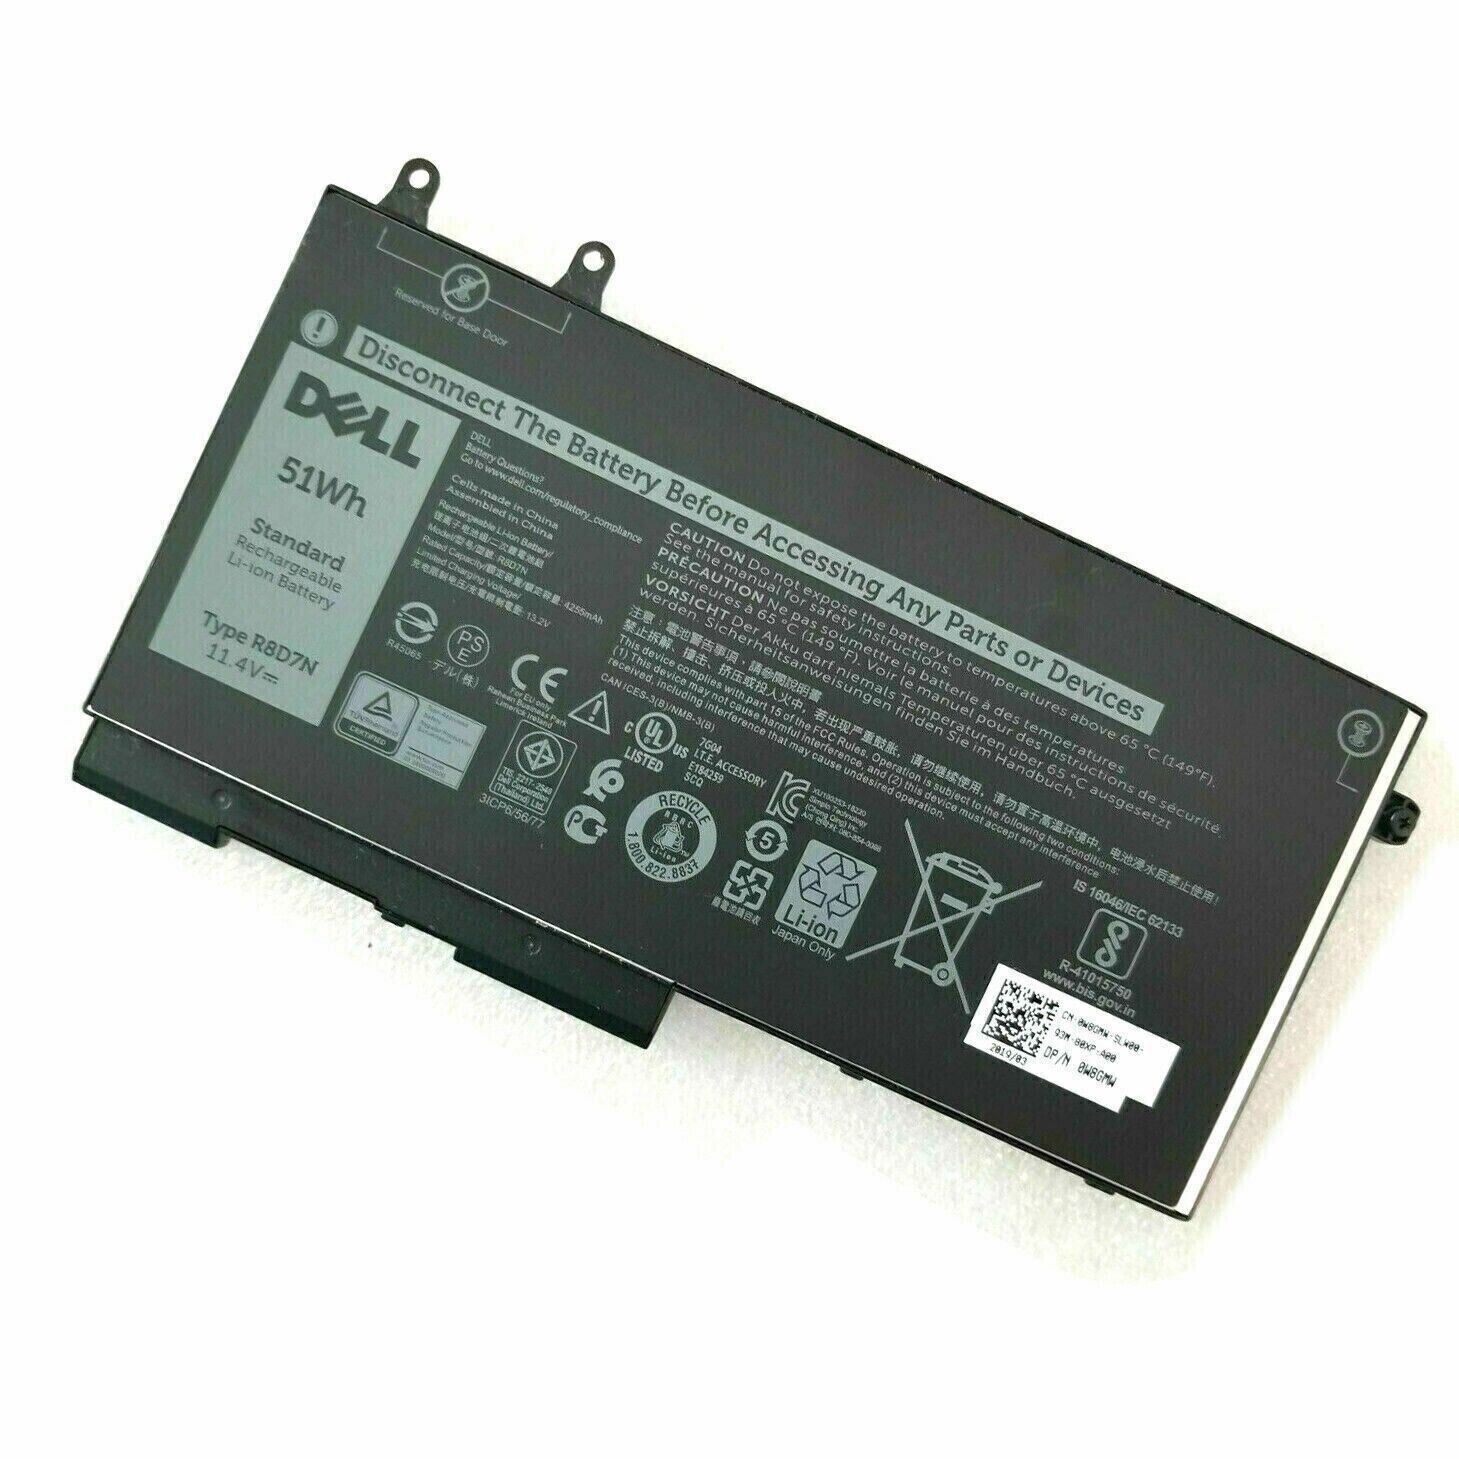 New OEM Dell R8D7N Battery for Dell Latitude 5400 5410 Precision 3540 0R8D7N